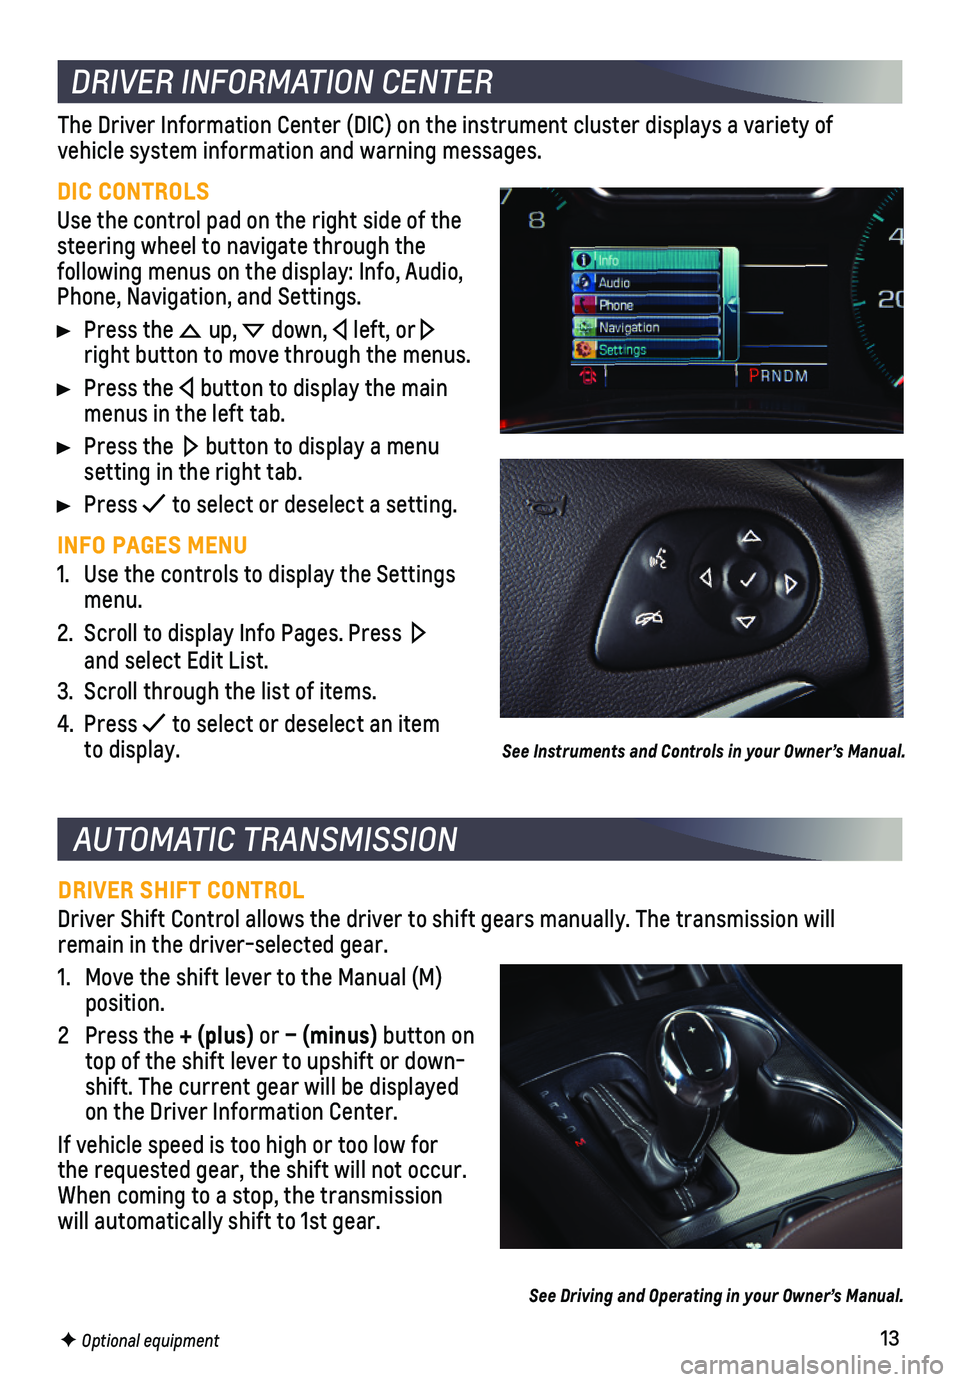 CHEVROLET IMPALA 2018  Get To Know Guide 13
AUTOMATIC TRANSMISSION 
DRIVER SHIFT CONTROL
Driver Shift Control allows the driver to shift gears manually. The tran\
smission will remain in the driver-selected gear.
1. Move the shift lever to t